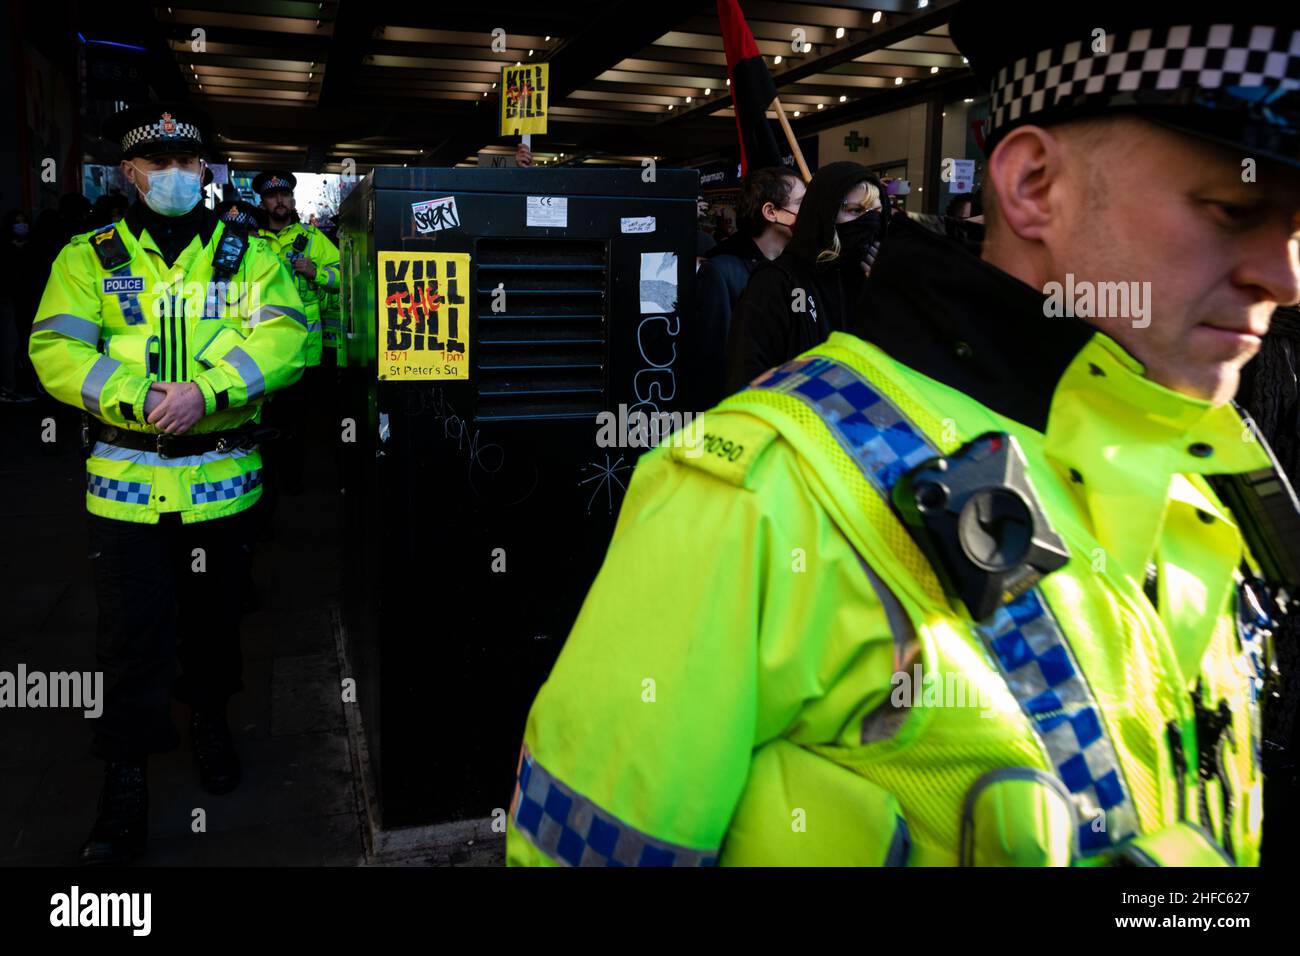 Manchester, UK. 15th Jan, 2022. The police follow the protesters during a Kill The Bill march. Protests across the country have been organised due to the proposed Police, Crime, Sentencing and Courts Bill. that, if passed, would introduce new legislation around demonstrations.ÊAndy Barton/Alamy Live News Credit: Andy Barton/Alamy Live News Stock Photo